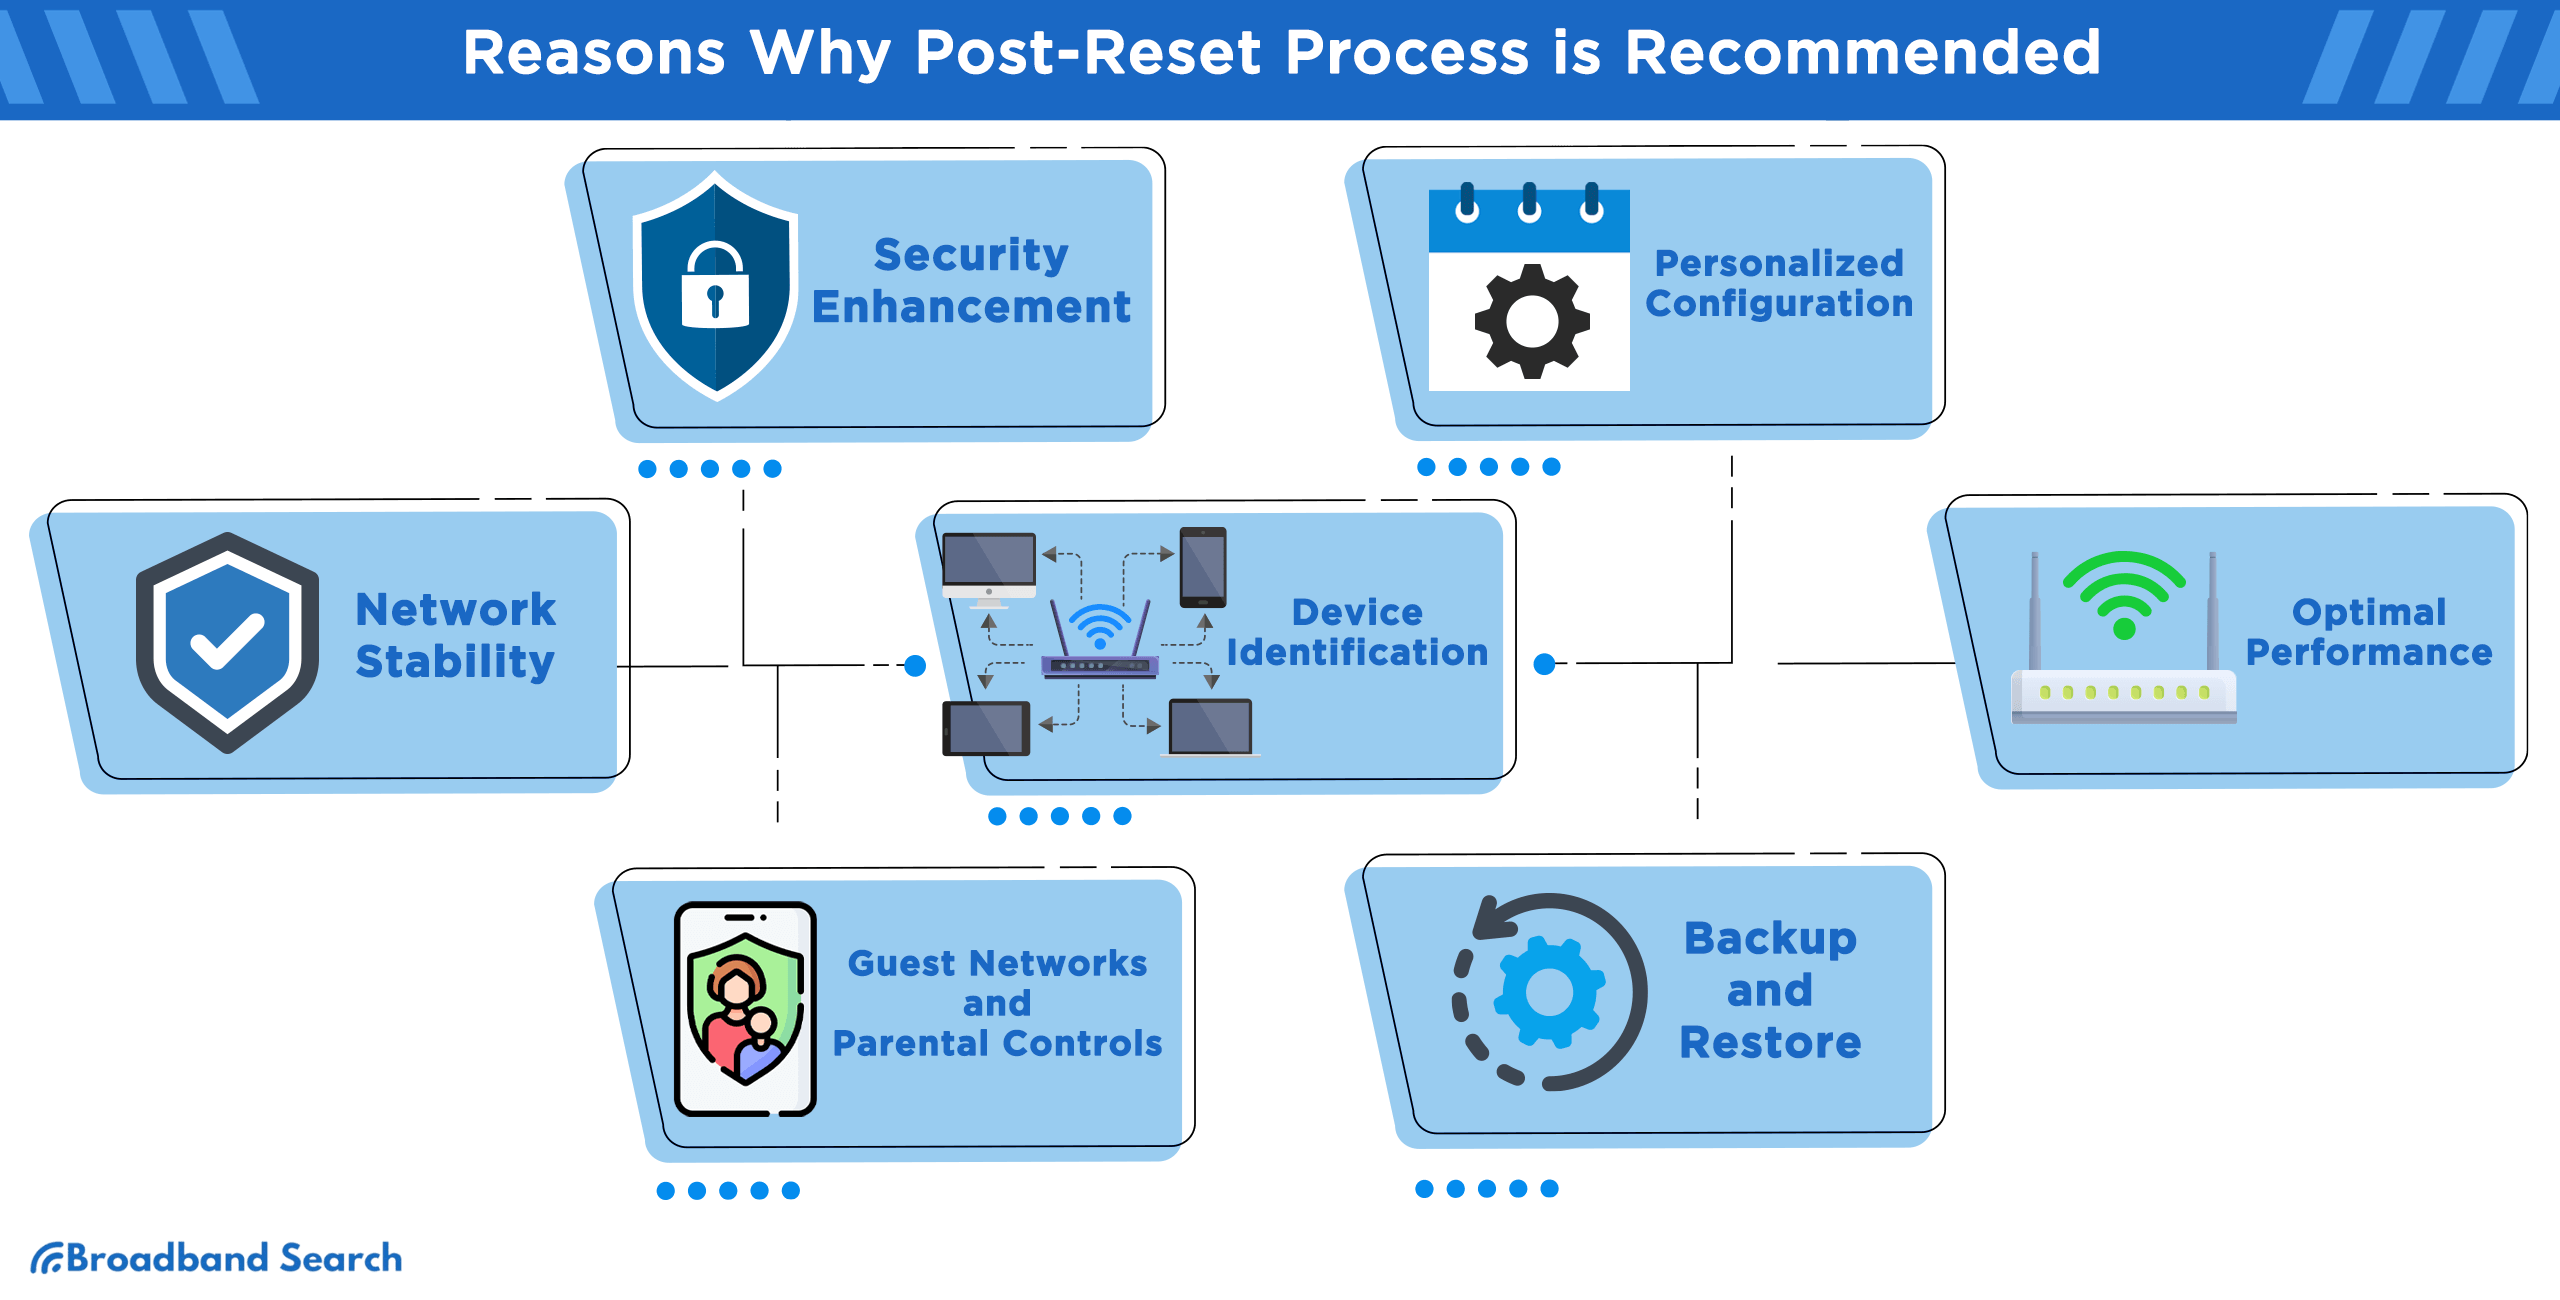 Reasons why post-reset process is recommended